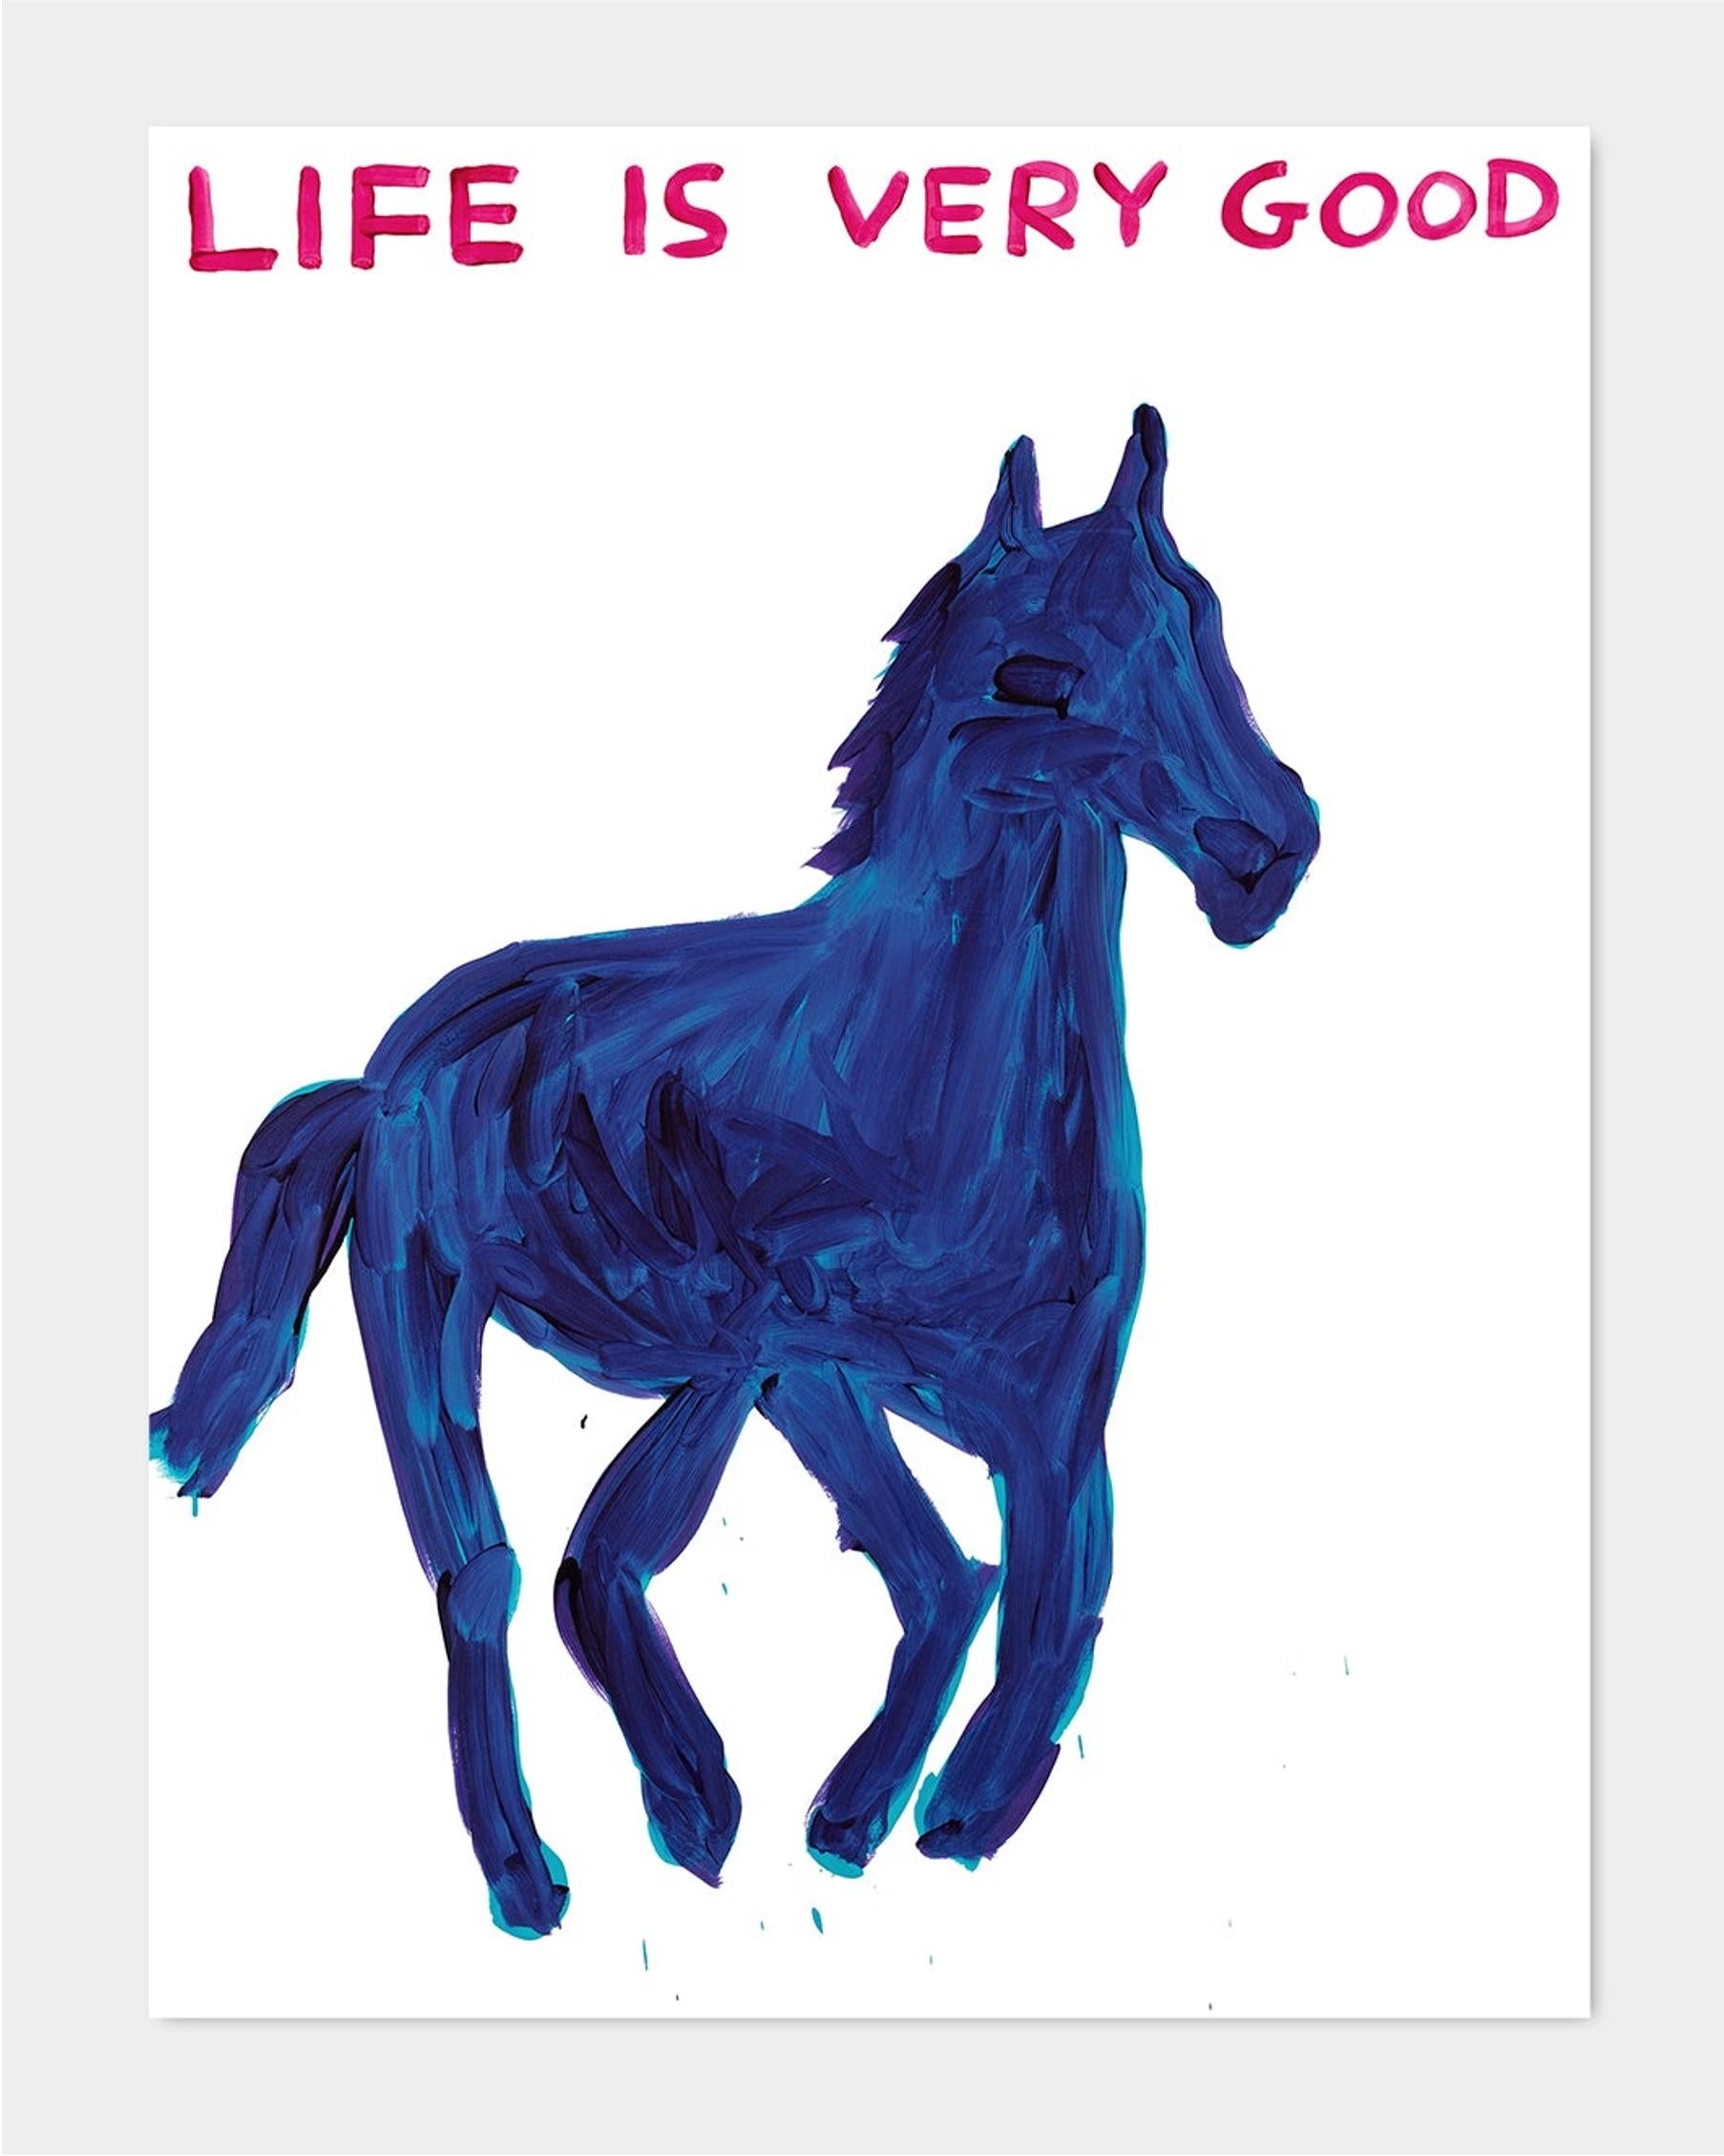 David Shrigley
Life is Very Good﻿ (2016)
80 x 60 cm
Off-set lithography
Printed on 200g Munken Lynx paper